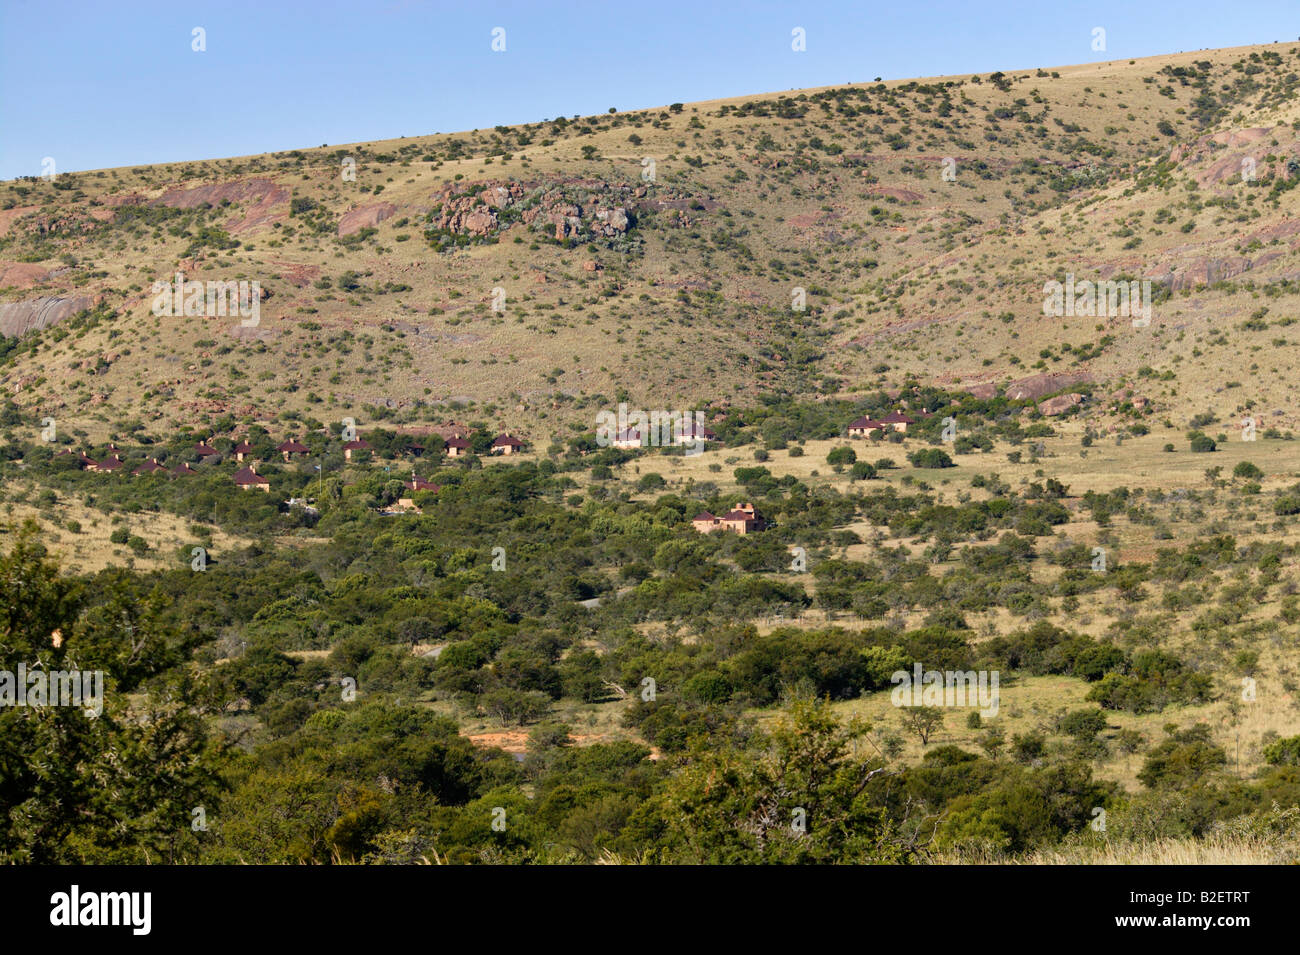 A distant view of the tourist accommodation in the Mountain Zebra National Park Stock Photo